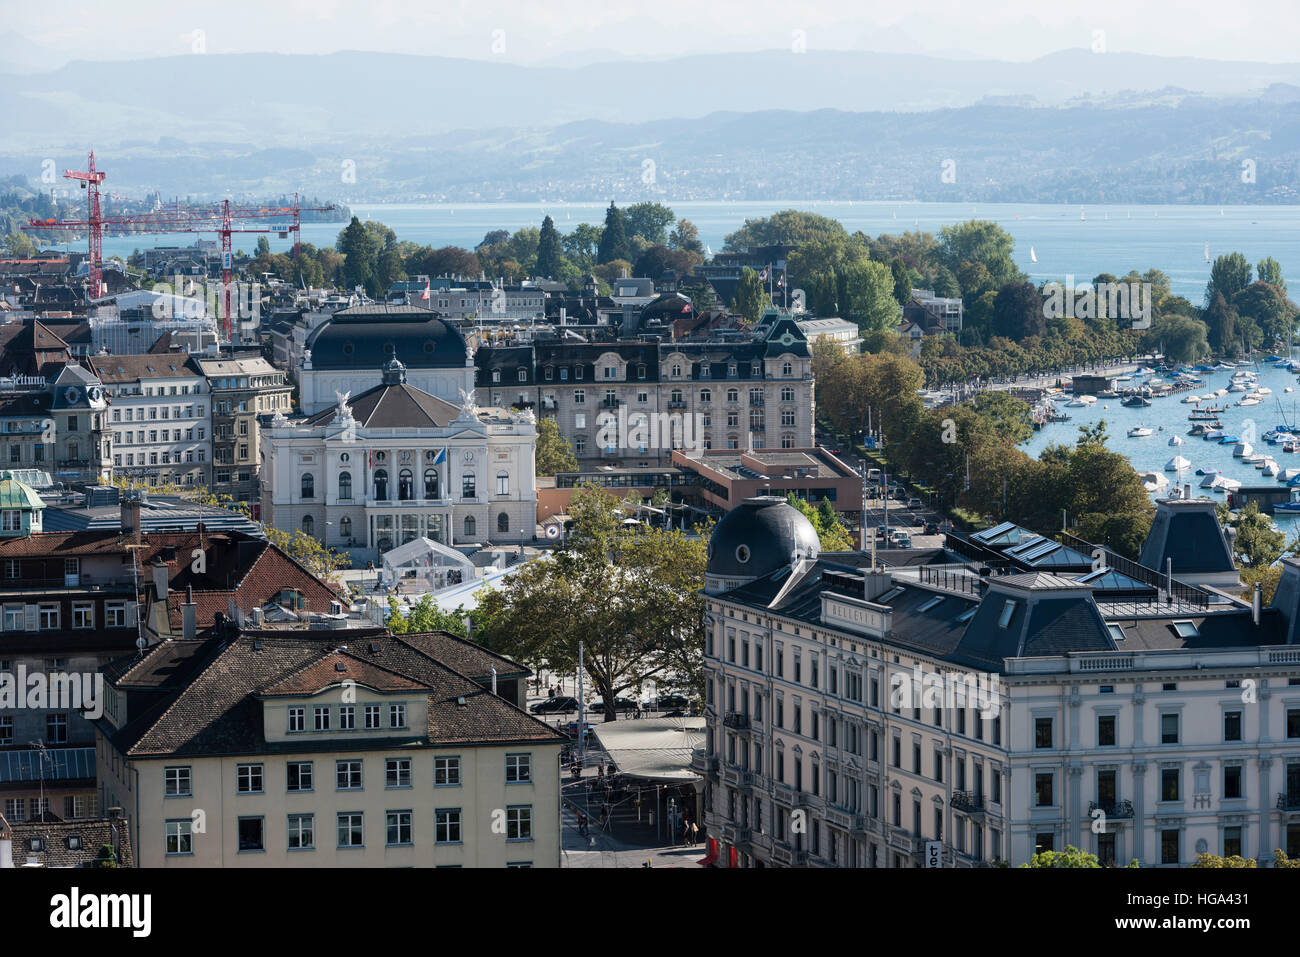 Zurich's Opera house (middle) and lake Zurich, seen from the observation deck of Grossmunster cathedral. Stock Photo